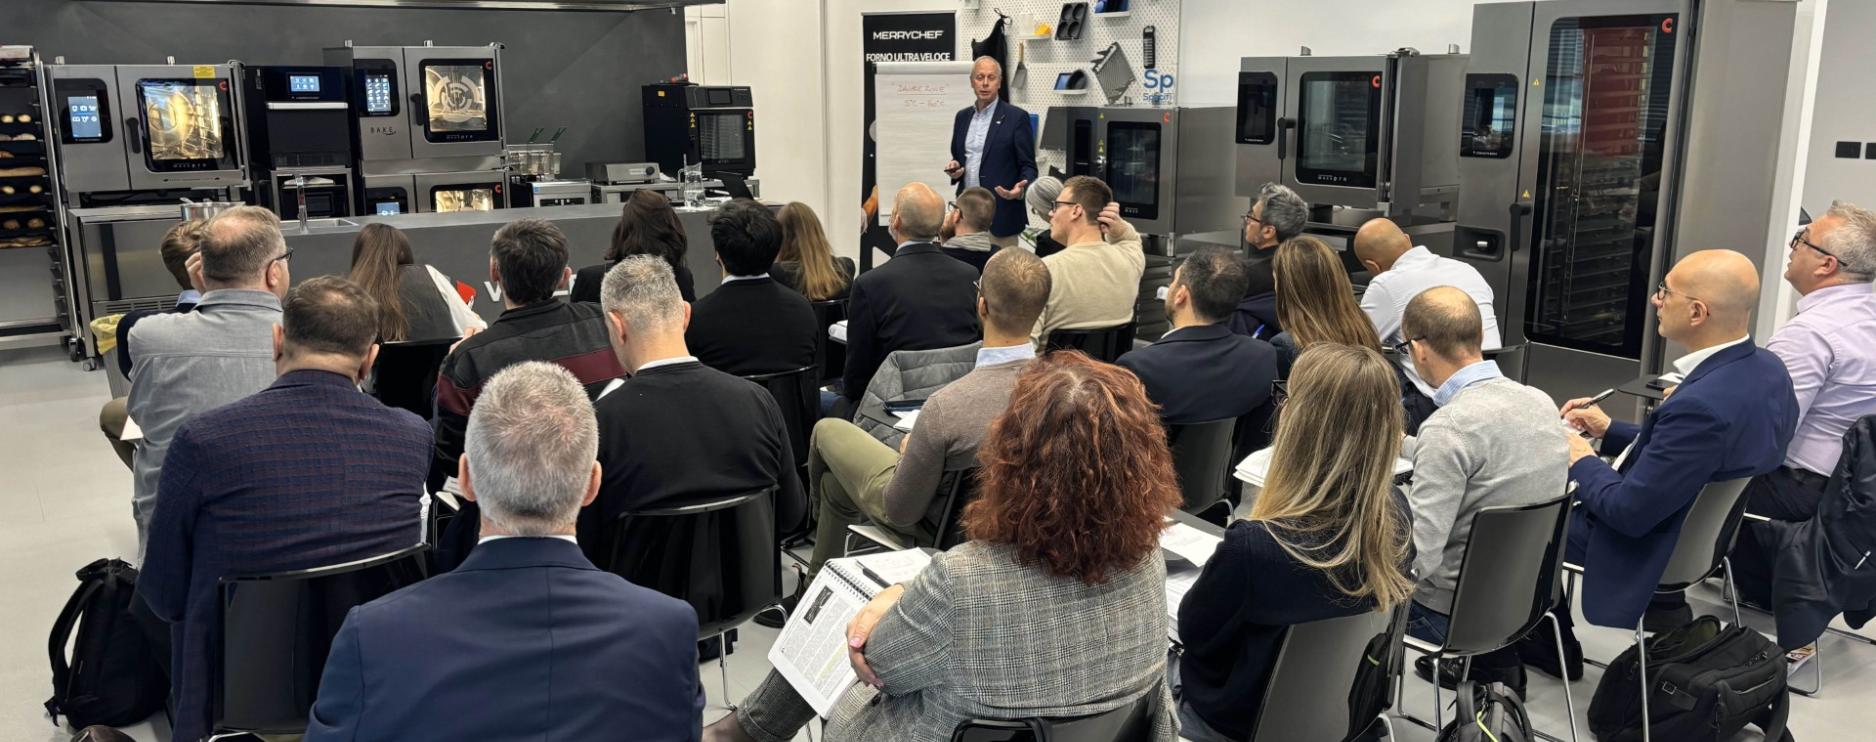 Foodservice Equipment Association runs first CFSP course in Italy